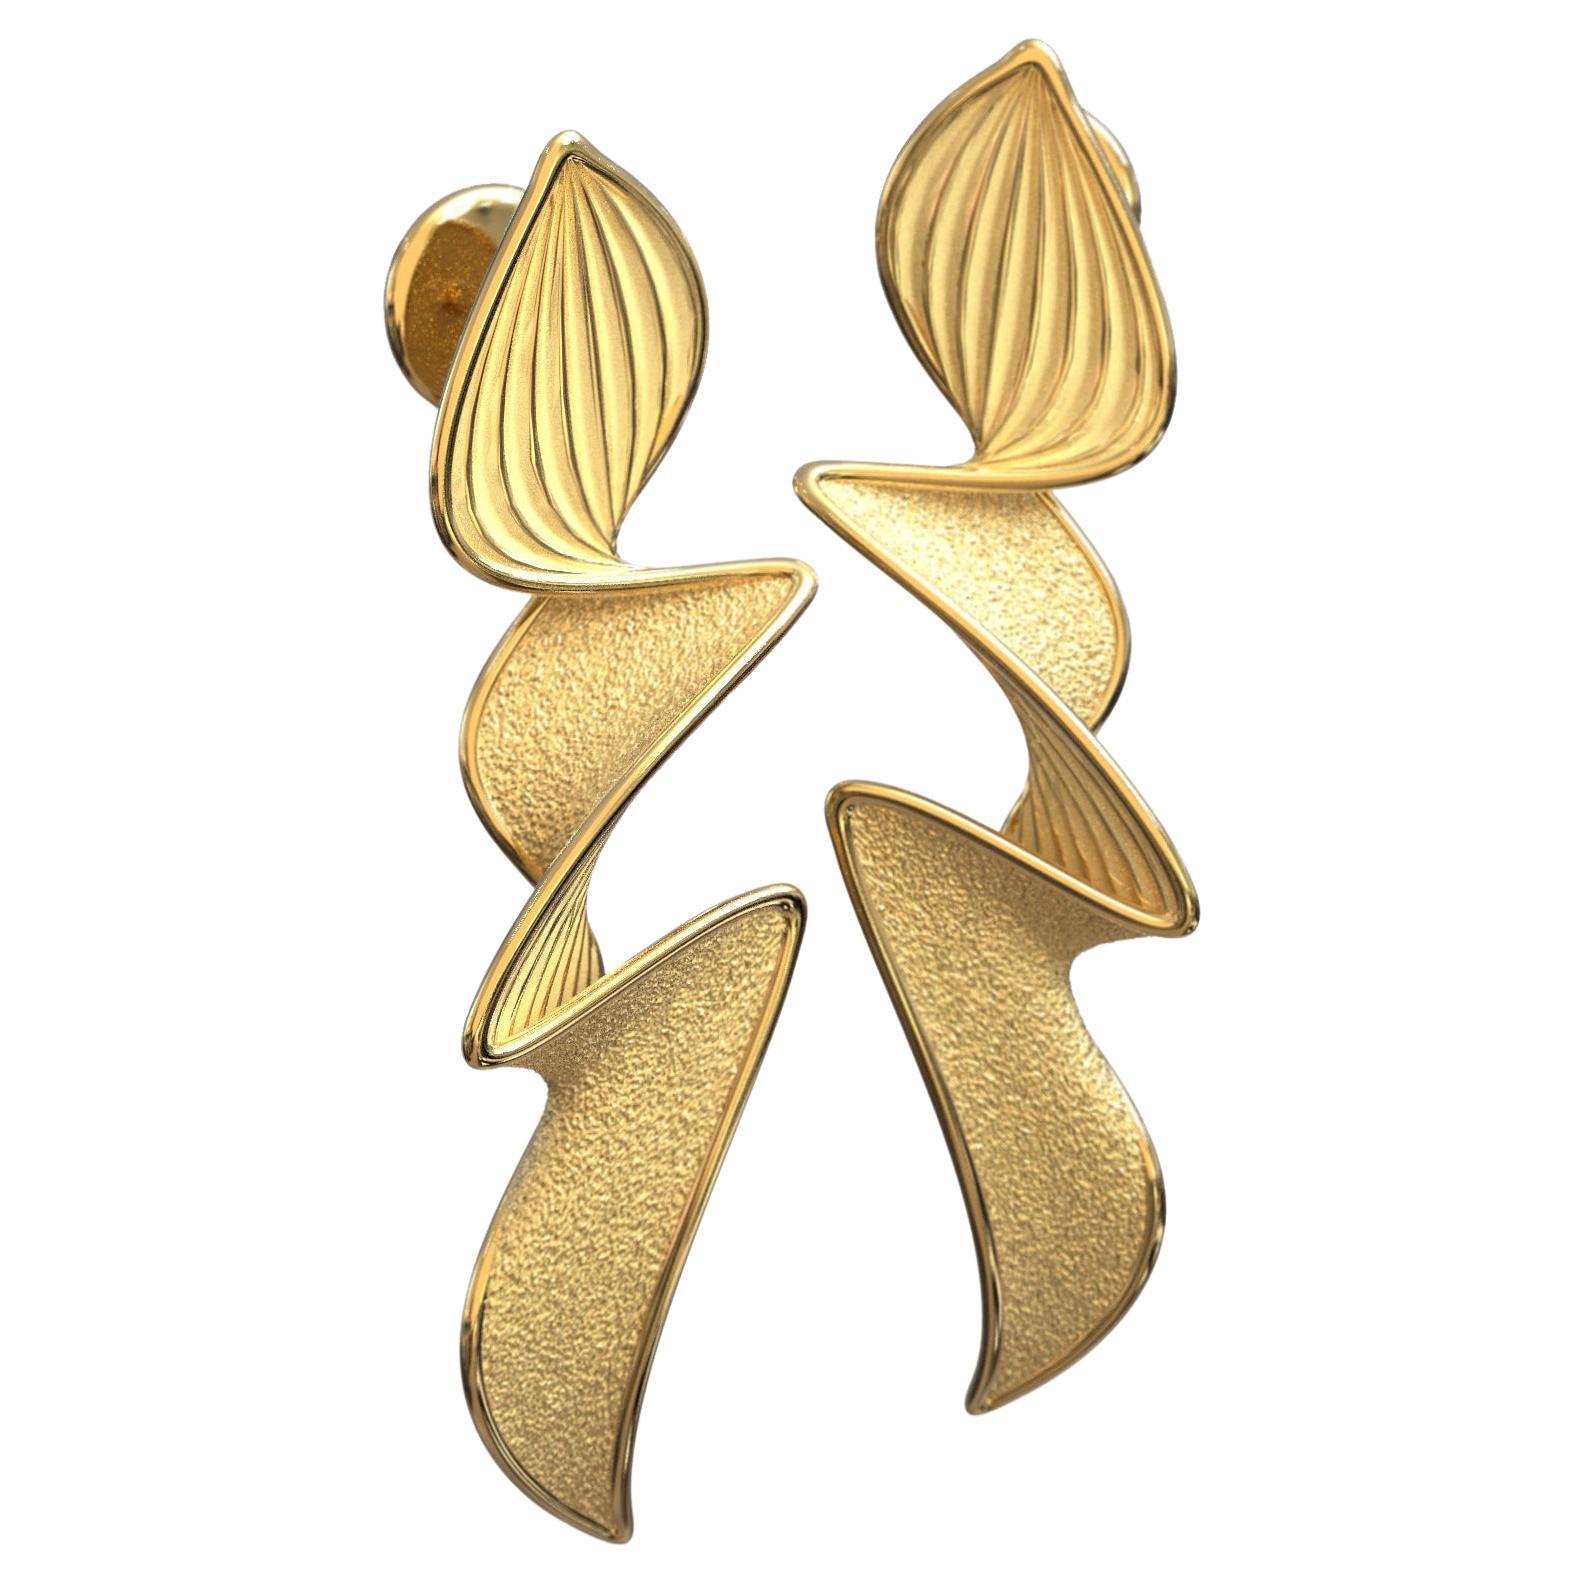 Contemporary Statement Earrings in solid gold 14k,  Italian fine jewelry made in Italy, long stud earring, modern and elegant earrings.
Earring length: 53 Millimeters; Width: 13 Millimeters
Available in yellow gold, rose gold and white gold, 14k or